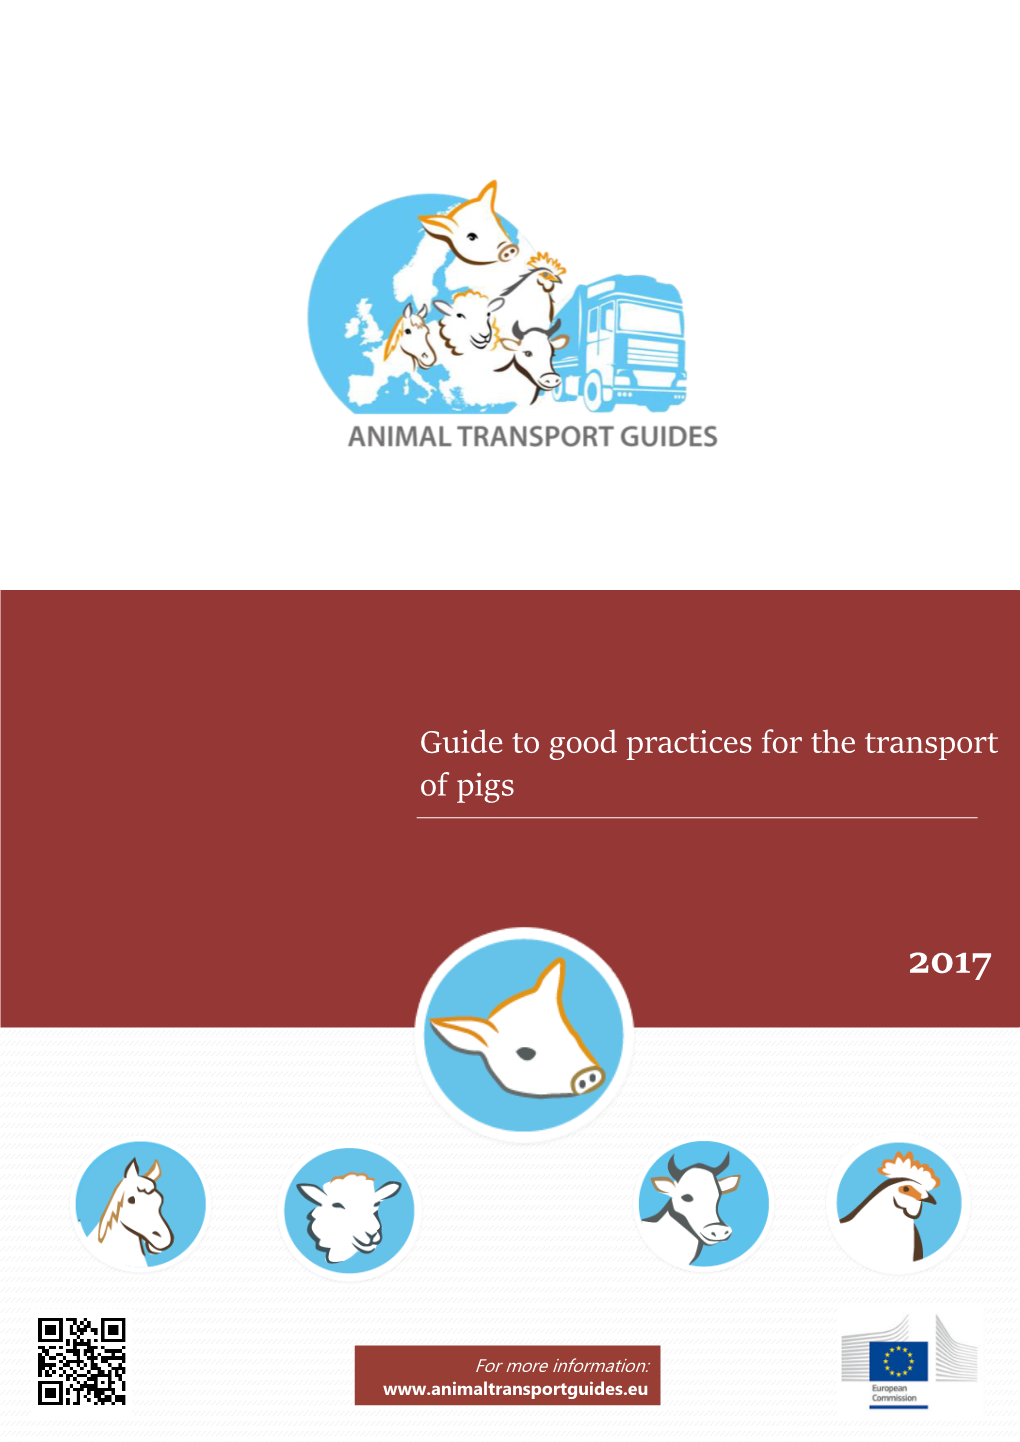 Guide to Good Practices for the Transport of Pigs’